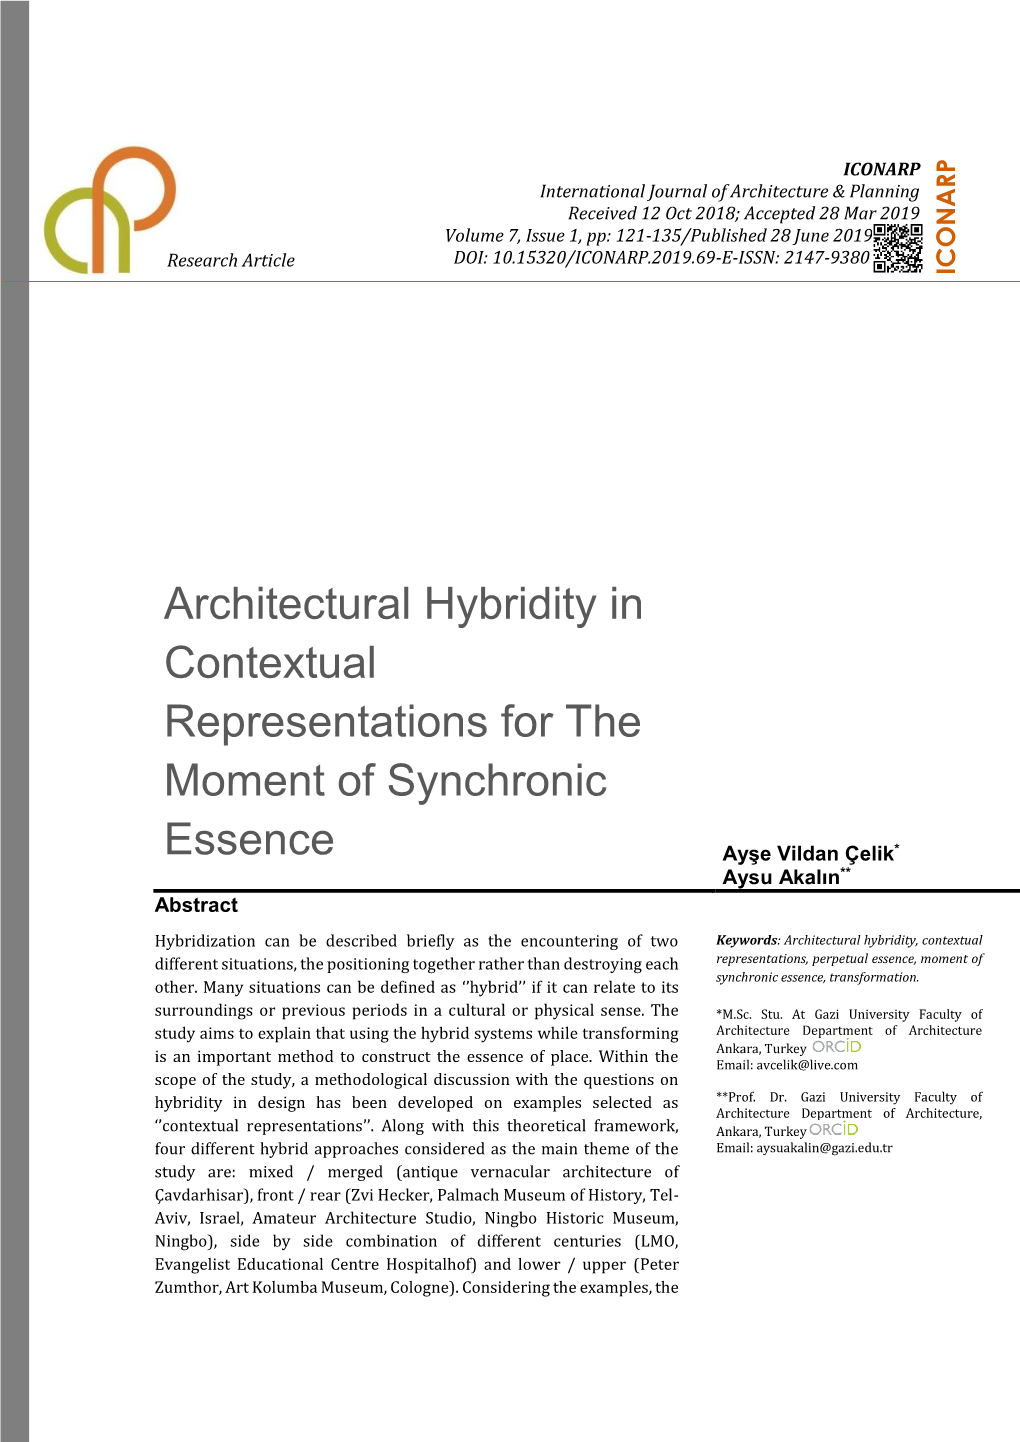 Architectural Hybridity in Contextual Representations for the Moment of Synchronic